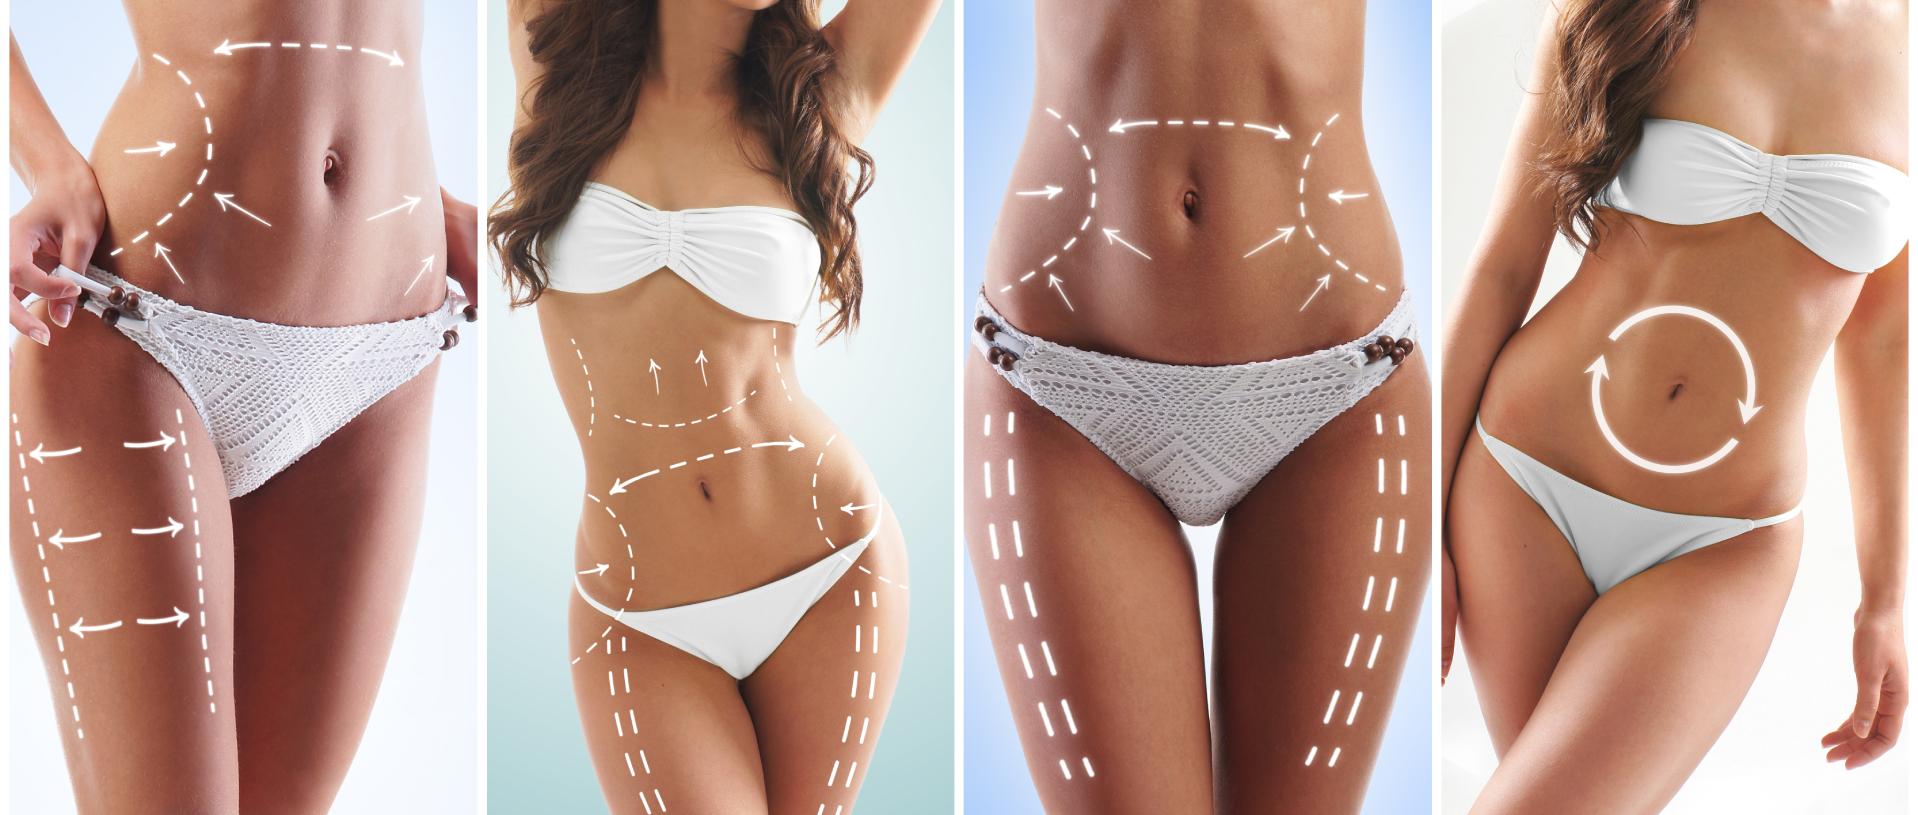 female body with the drawing arrows, liposuction and cellulite removal